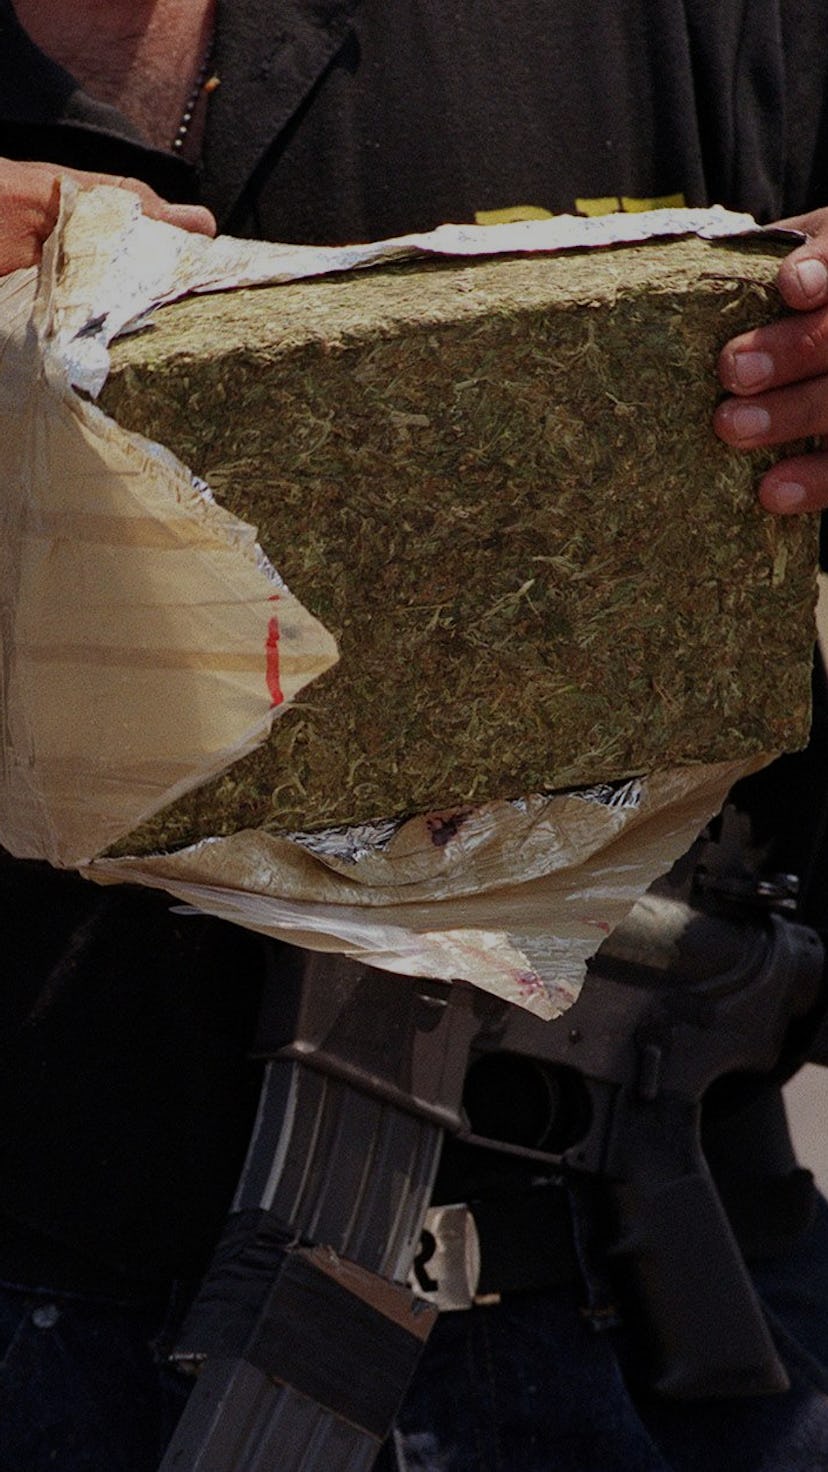 Mexican anti-narcotics police prepare to burn 2.5 tons of marijuana and cocaine in Mazatlan in the M...